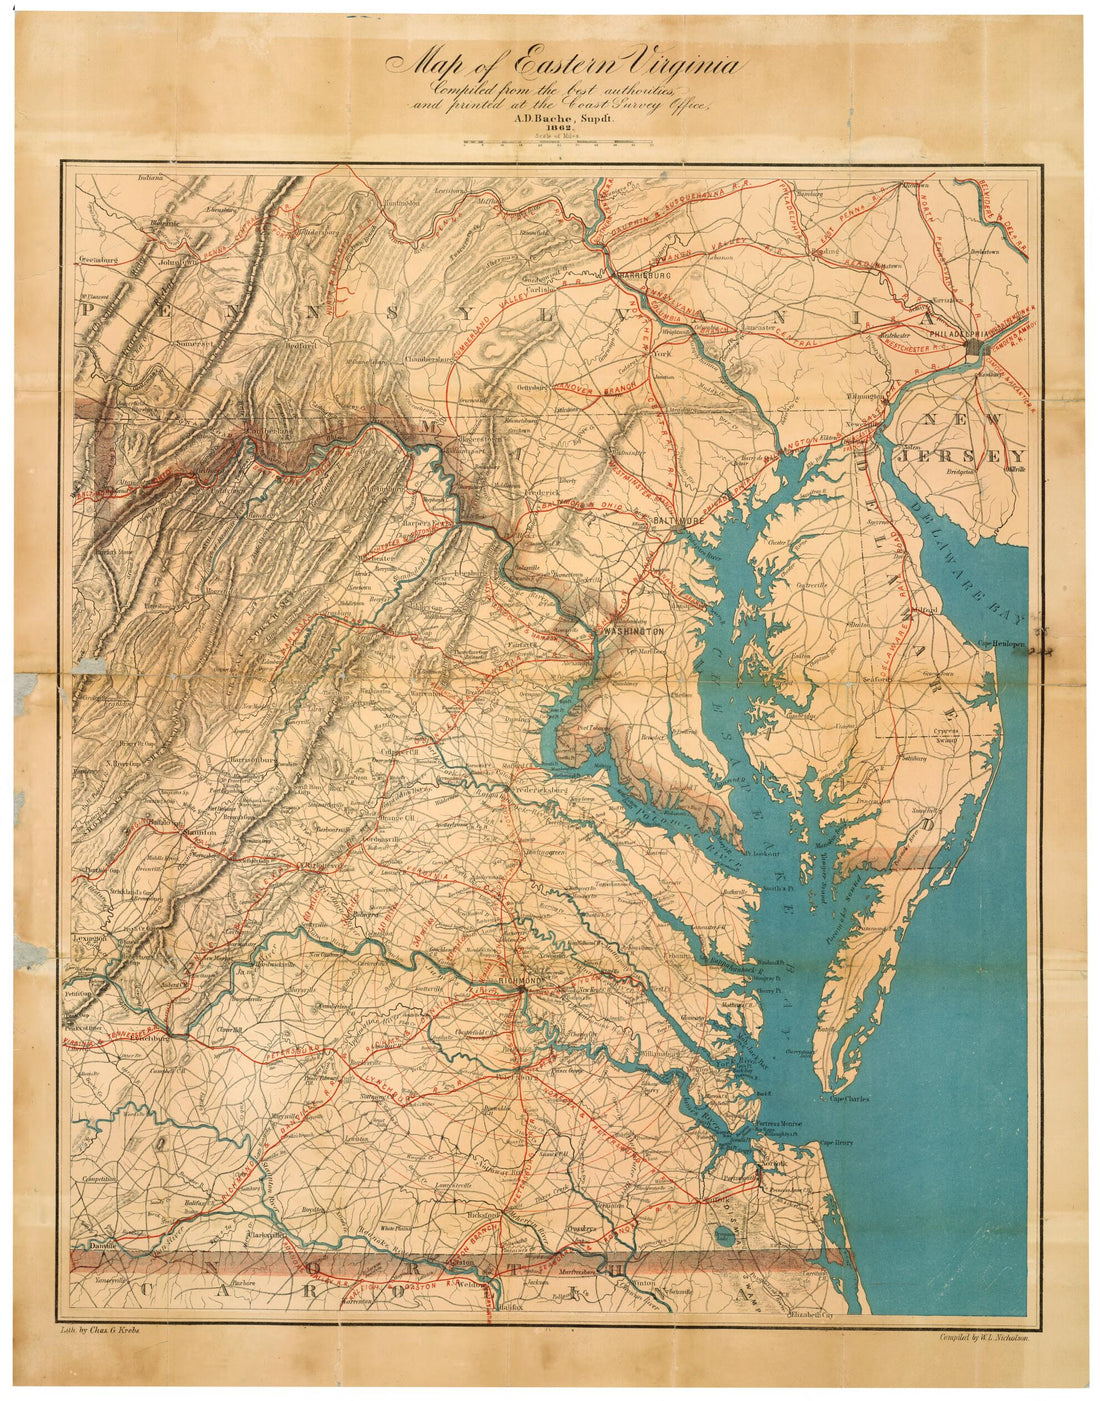 This old map of Map of Eastern Virginia, from 1862 was created by A. D. (Alexander Dallas) Bache, W. L. Nicholson,  United States Coast Survey,  W.H. &amp; O.H. Morrison (Firm) in 1862